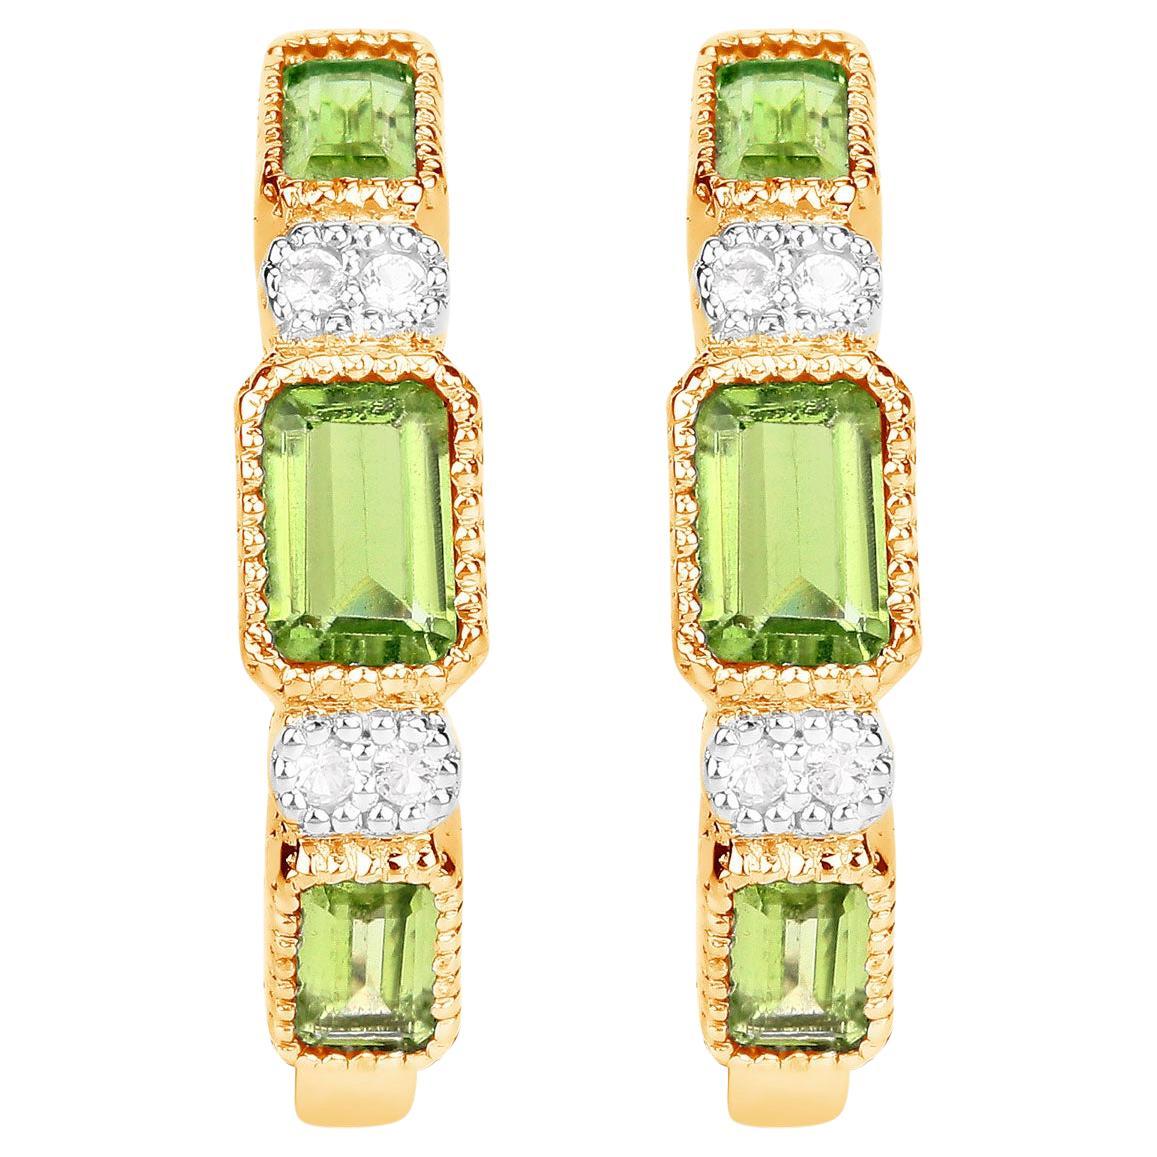 Natural Peridot Hoop Earrings White Topaz 2.44 Carats 14K Gold Plated Silver